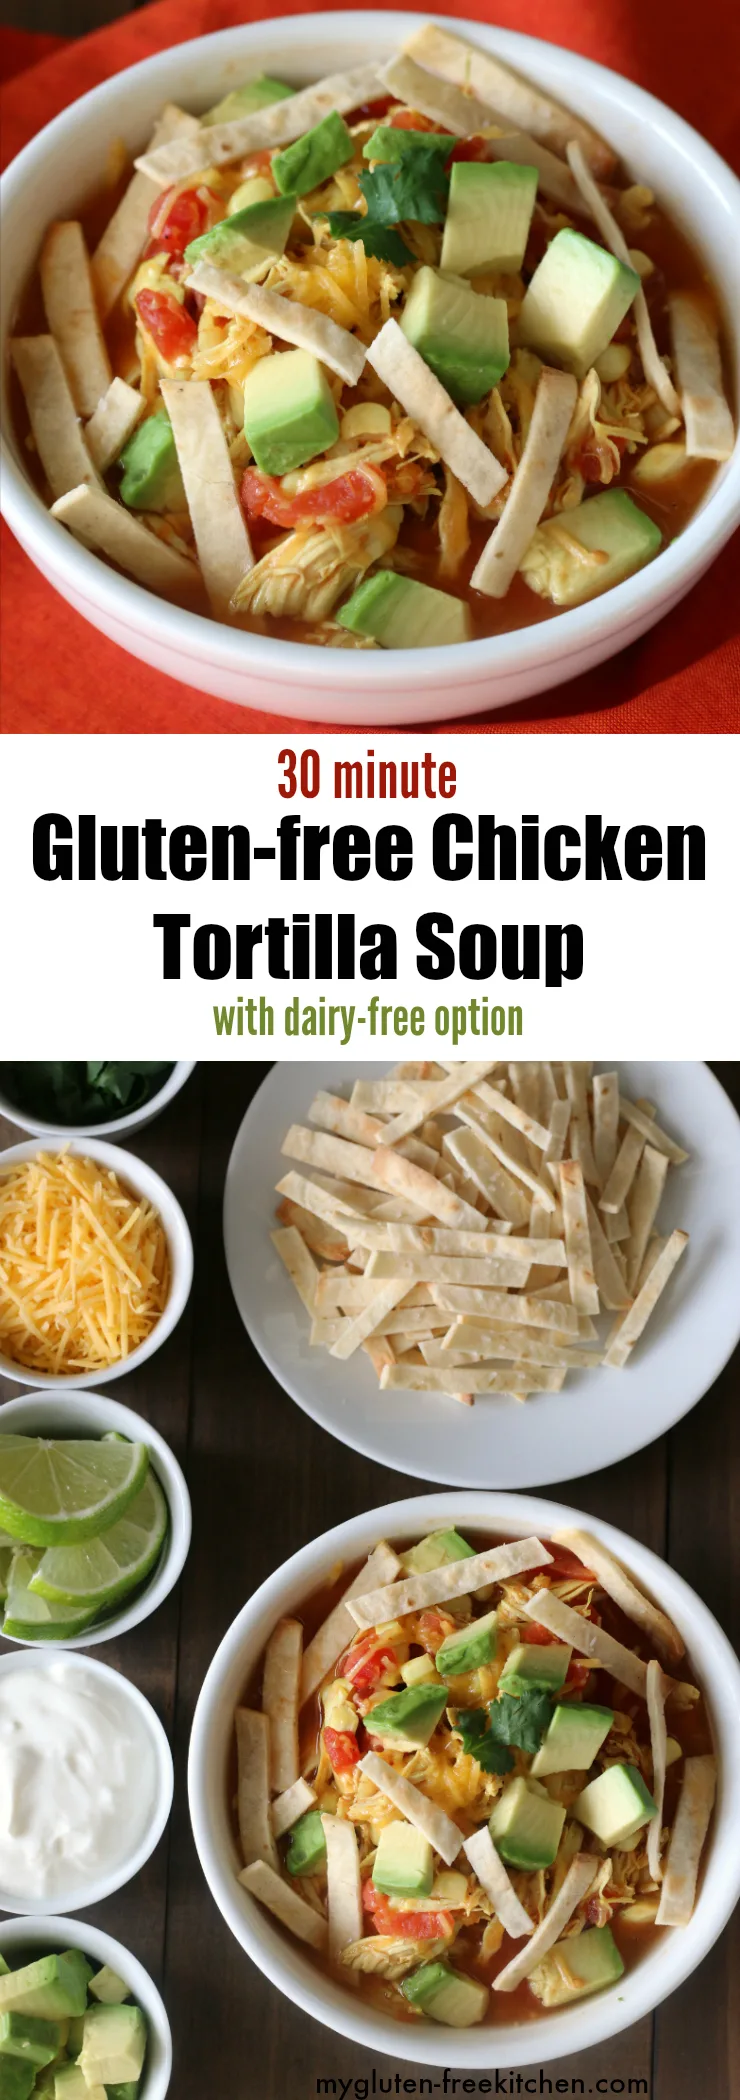 Gluten-free Chicken Tortilla Soup with dairy-free option. 30 minute recipe!